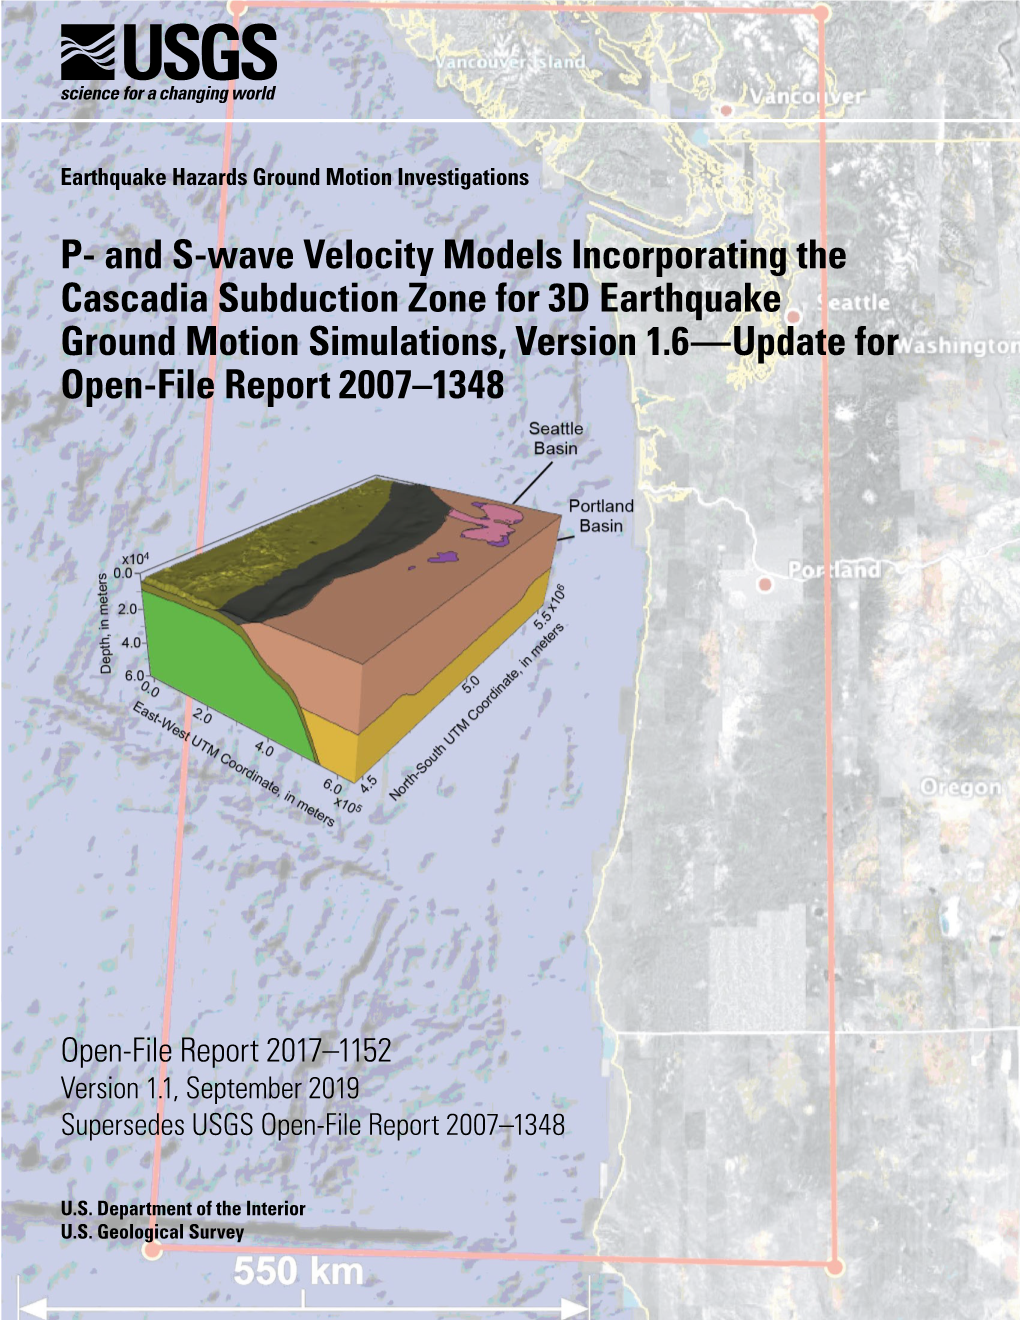 P- and S-Wave Velocity Models Incorporating the Cascadia